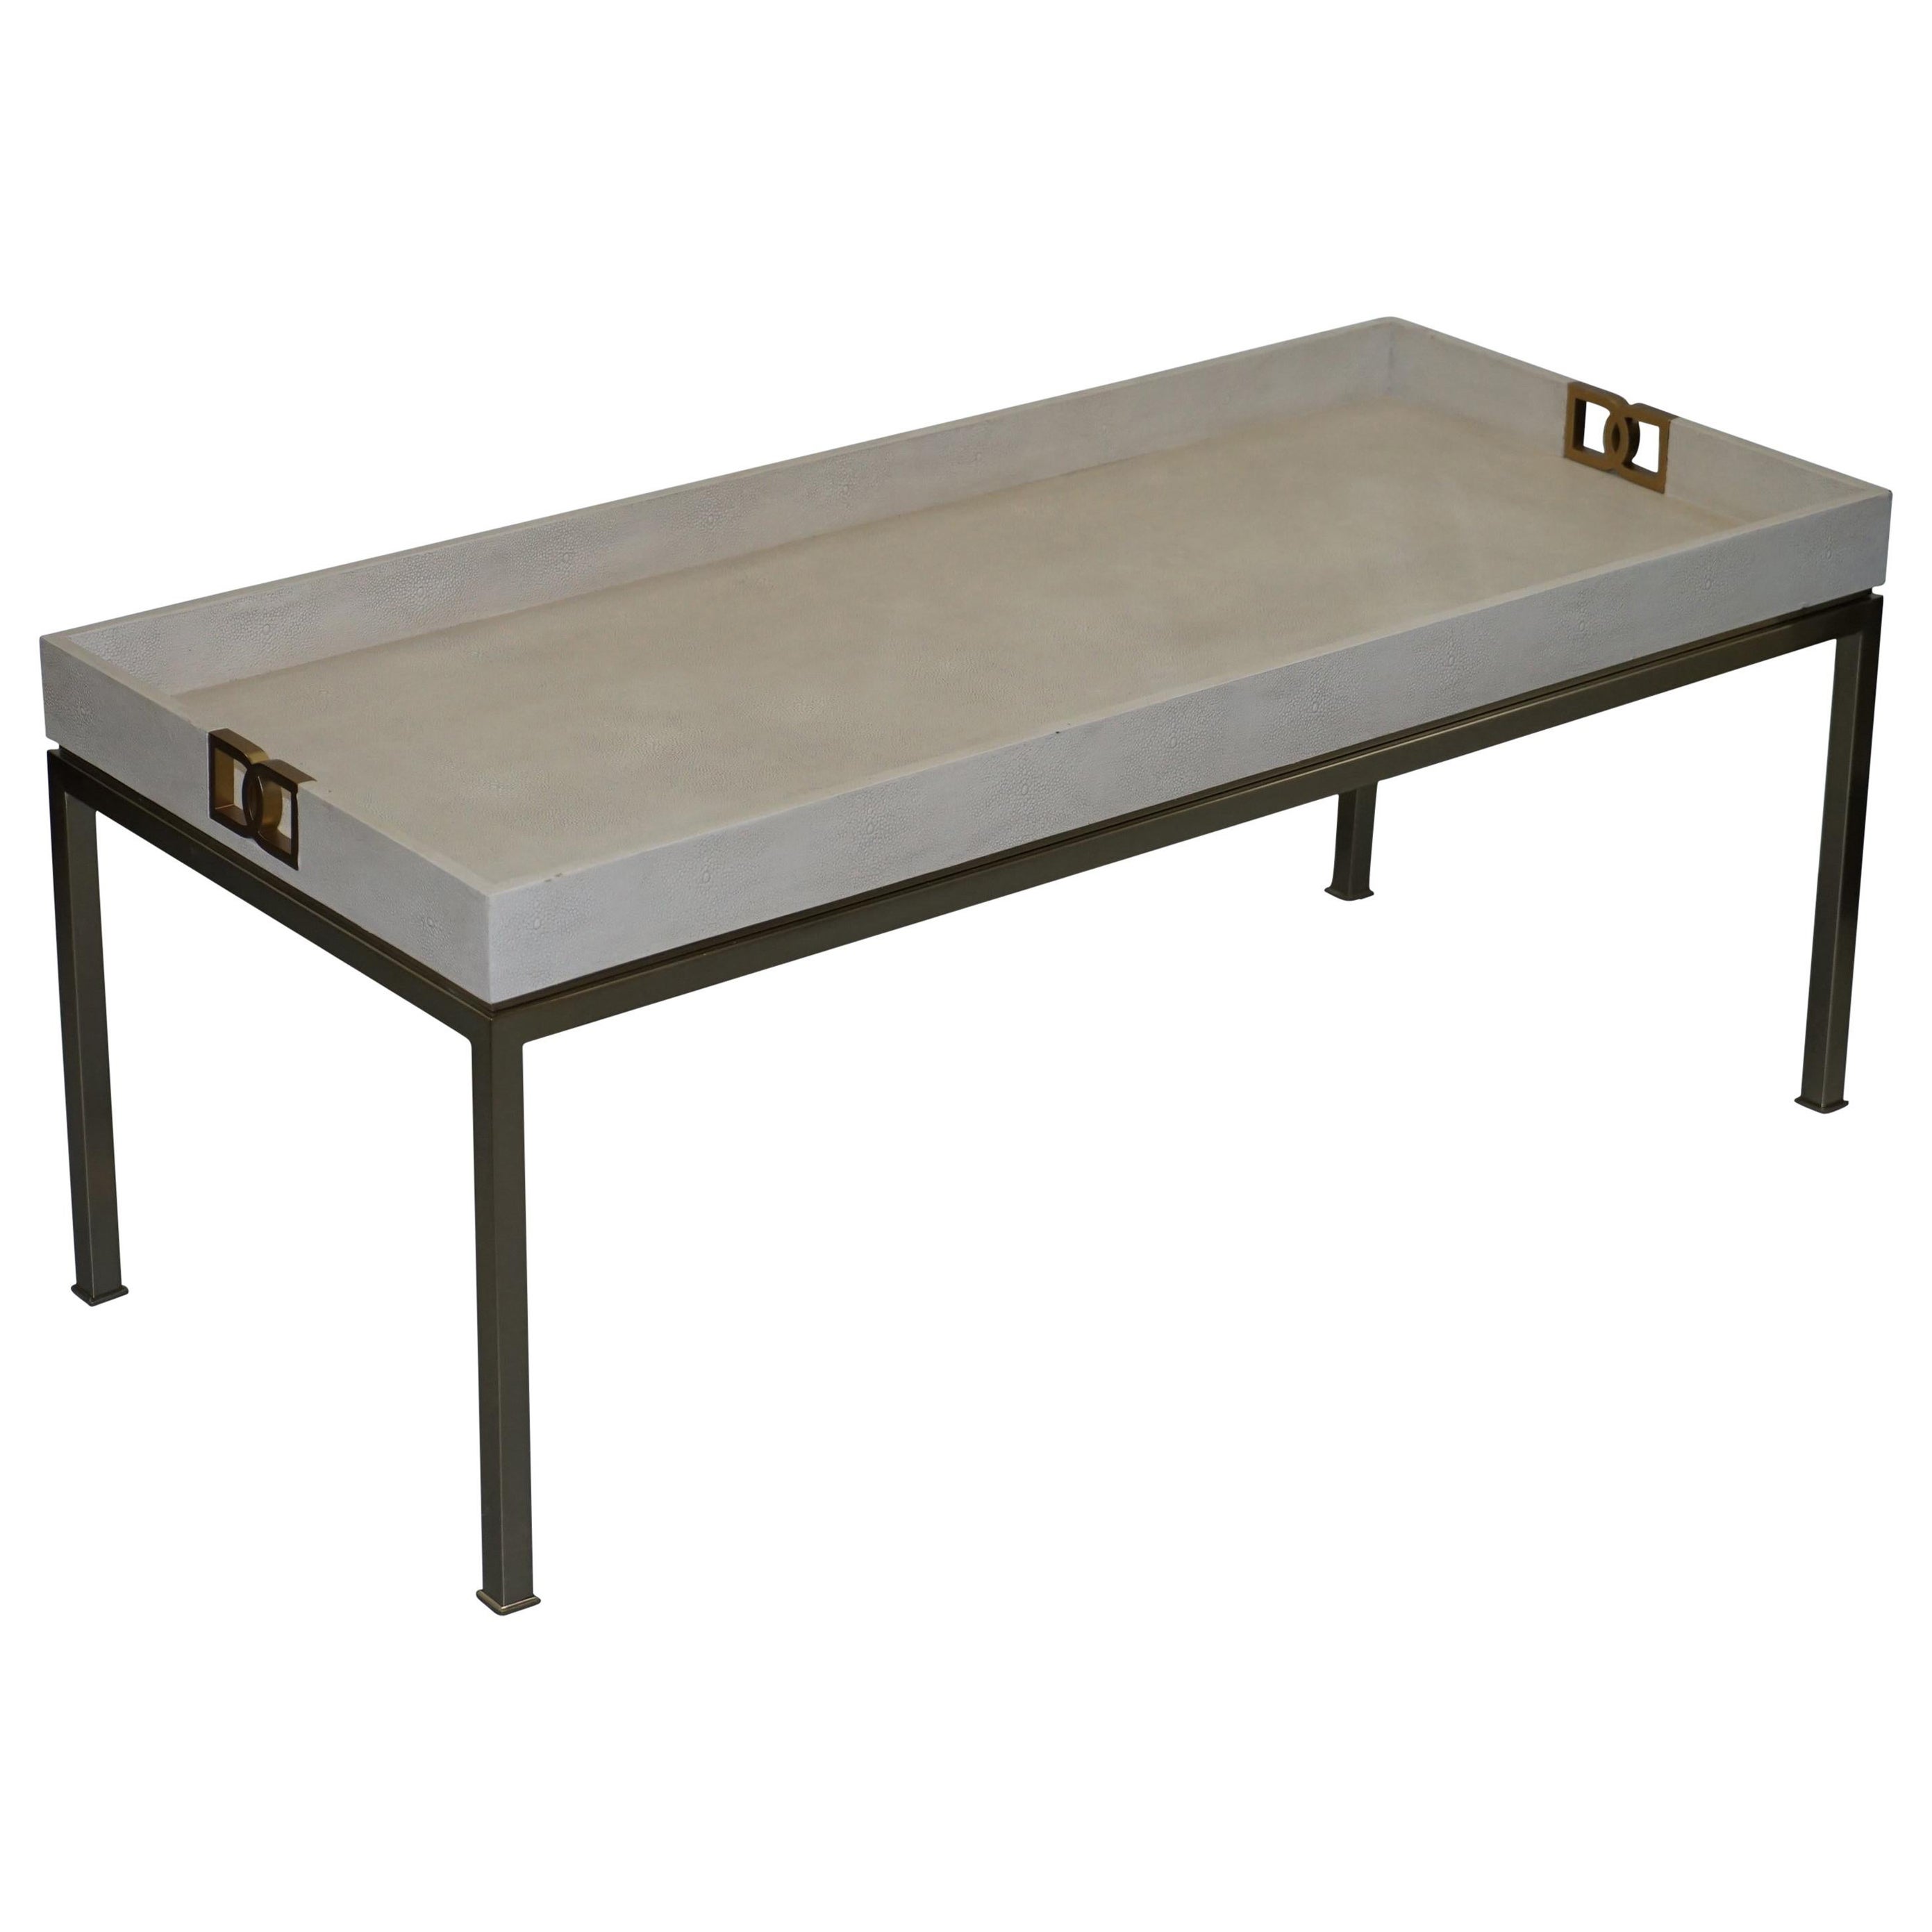 Paolo Moschino for Nicholas Haslam Salon Coffee Table Chrome Finish For Sale